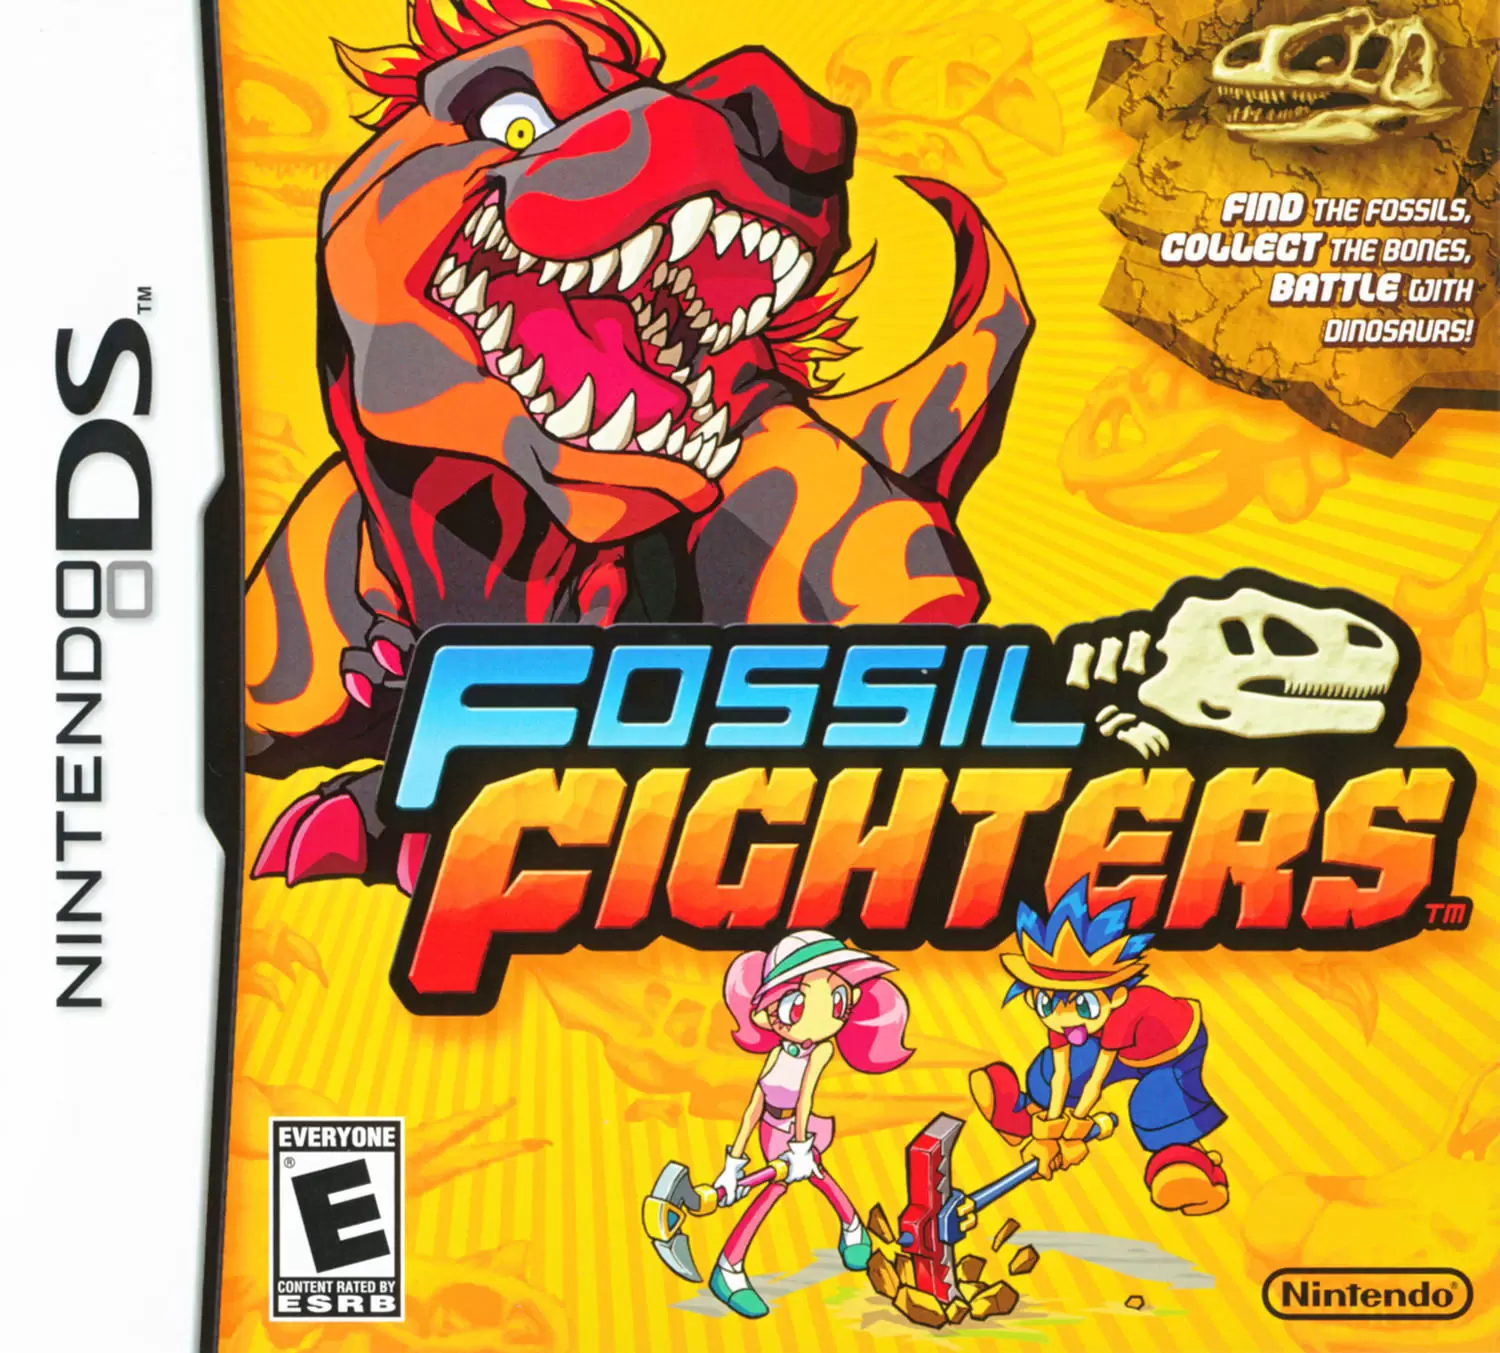 Nintendo DS Games - Fossil Fighters